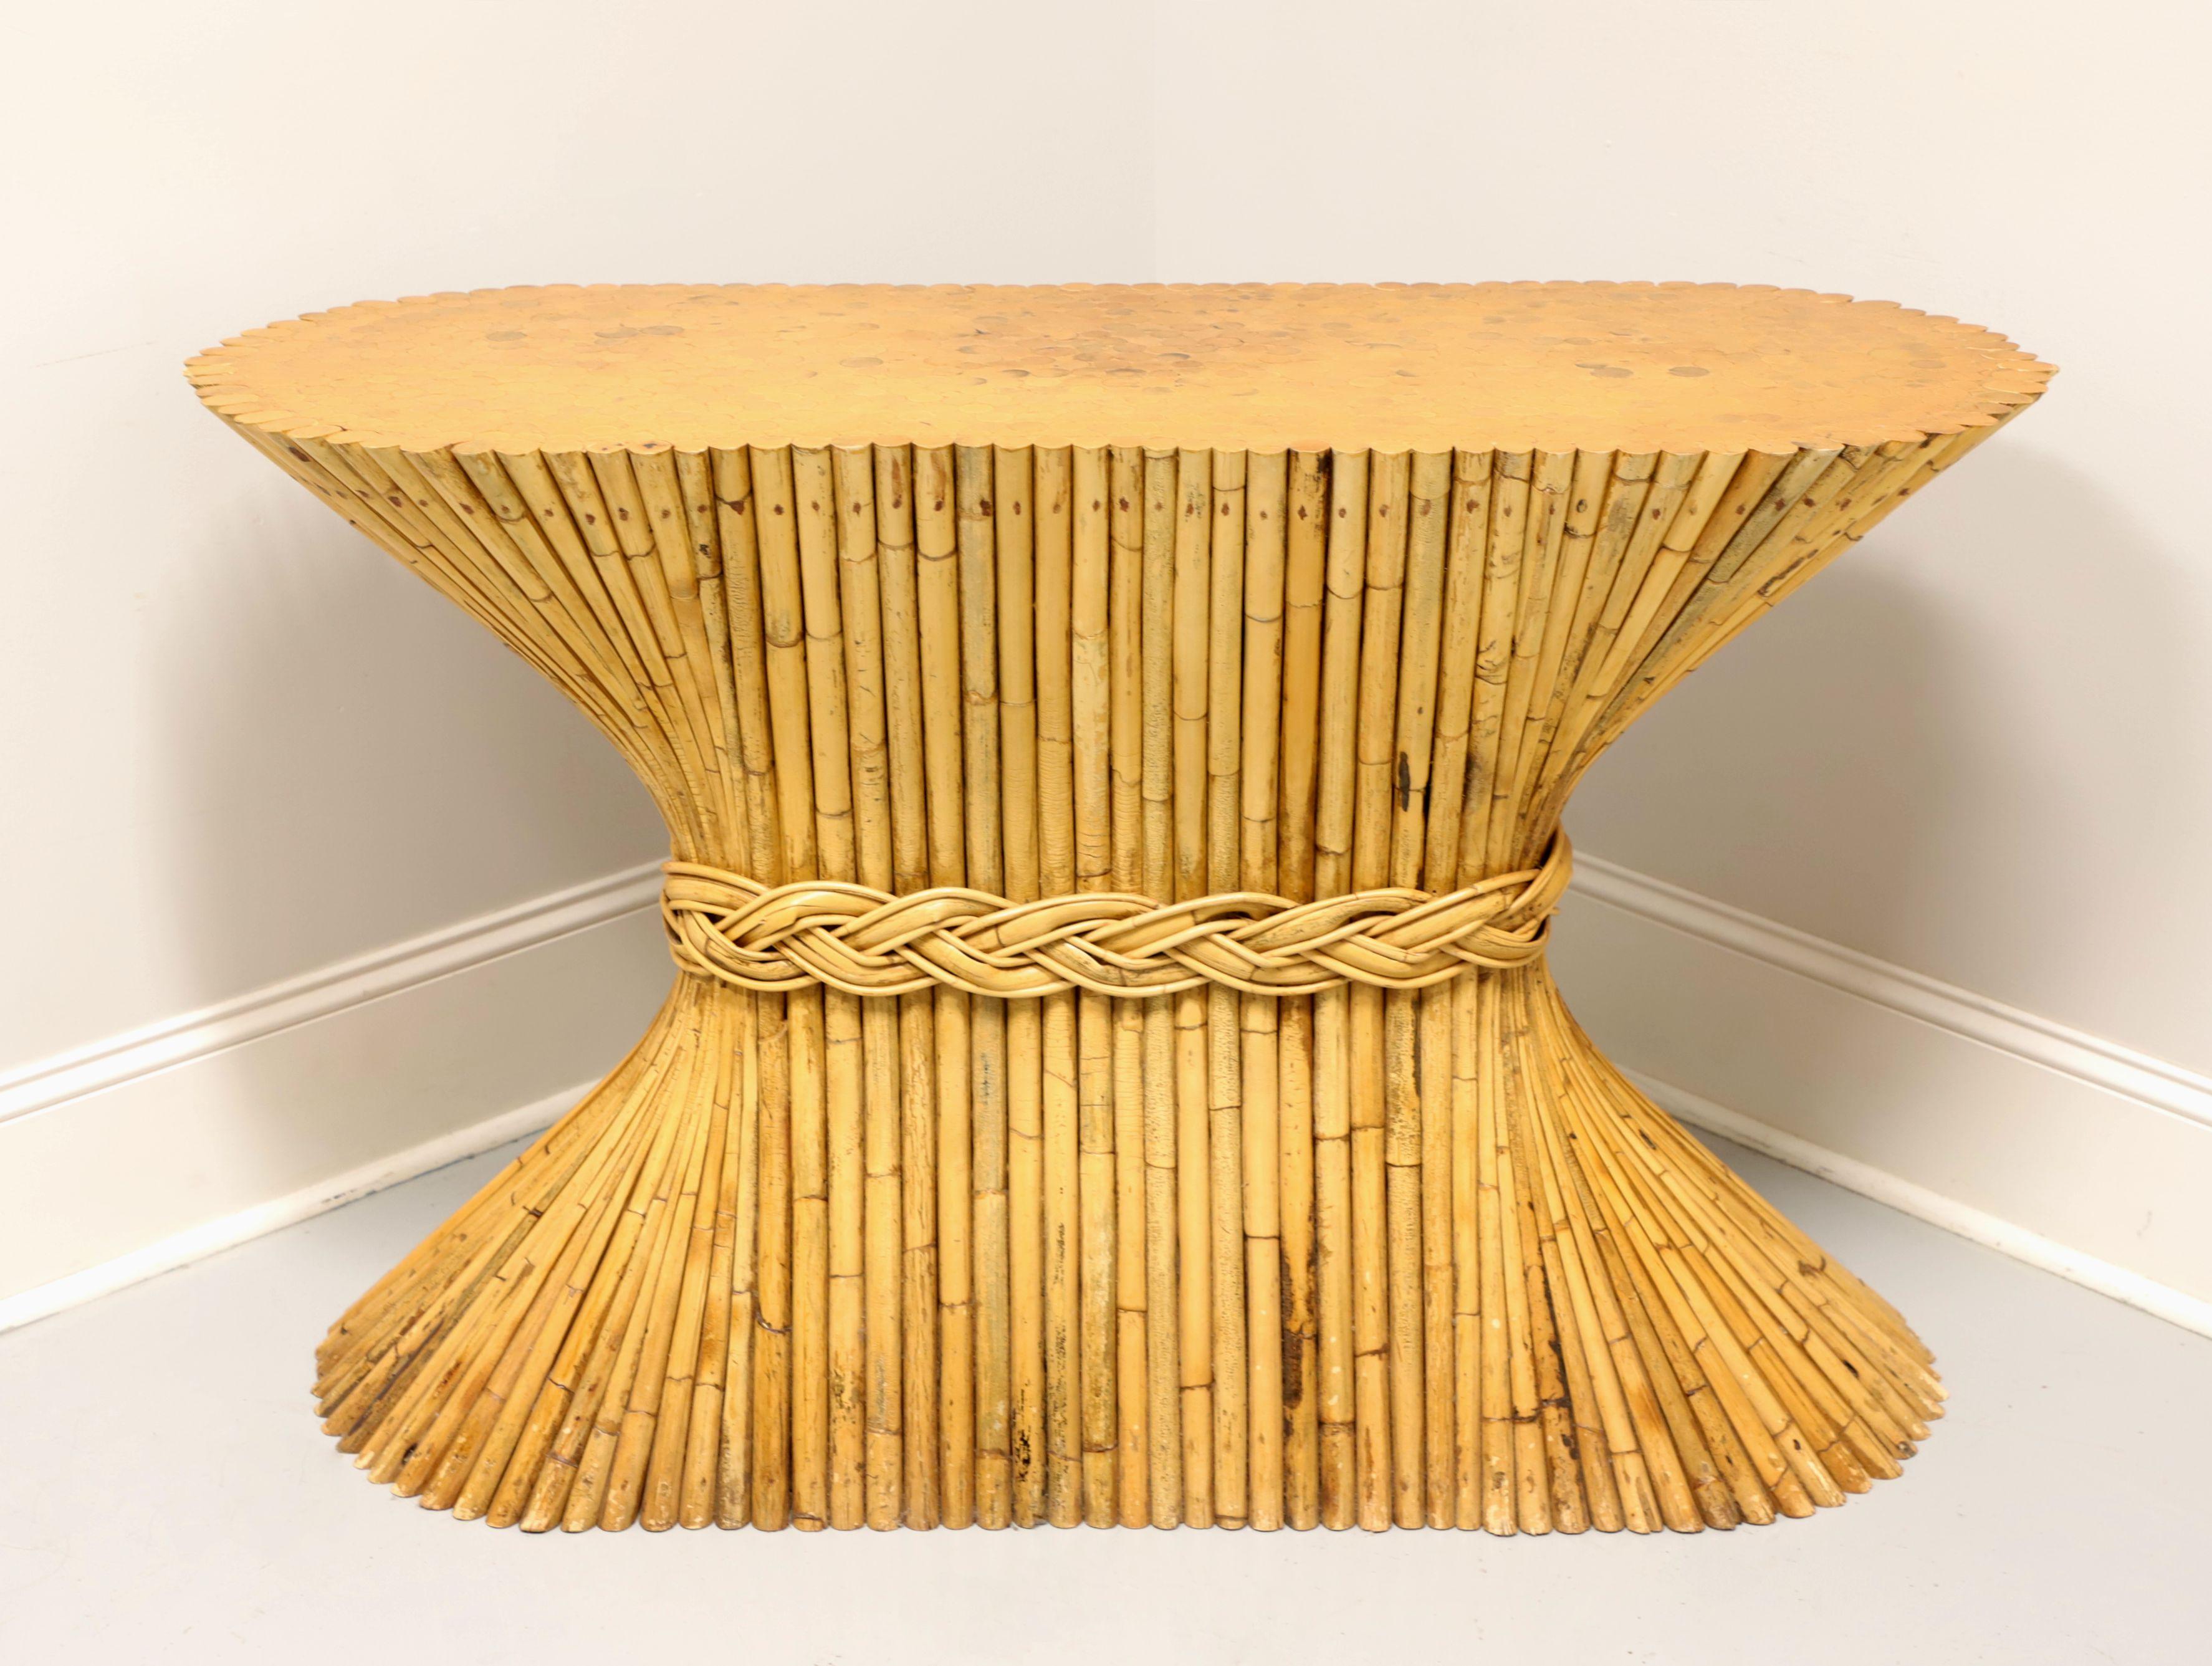 A Tropical style dining table base by McGuire Furniture, their 